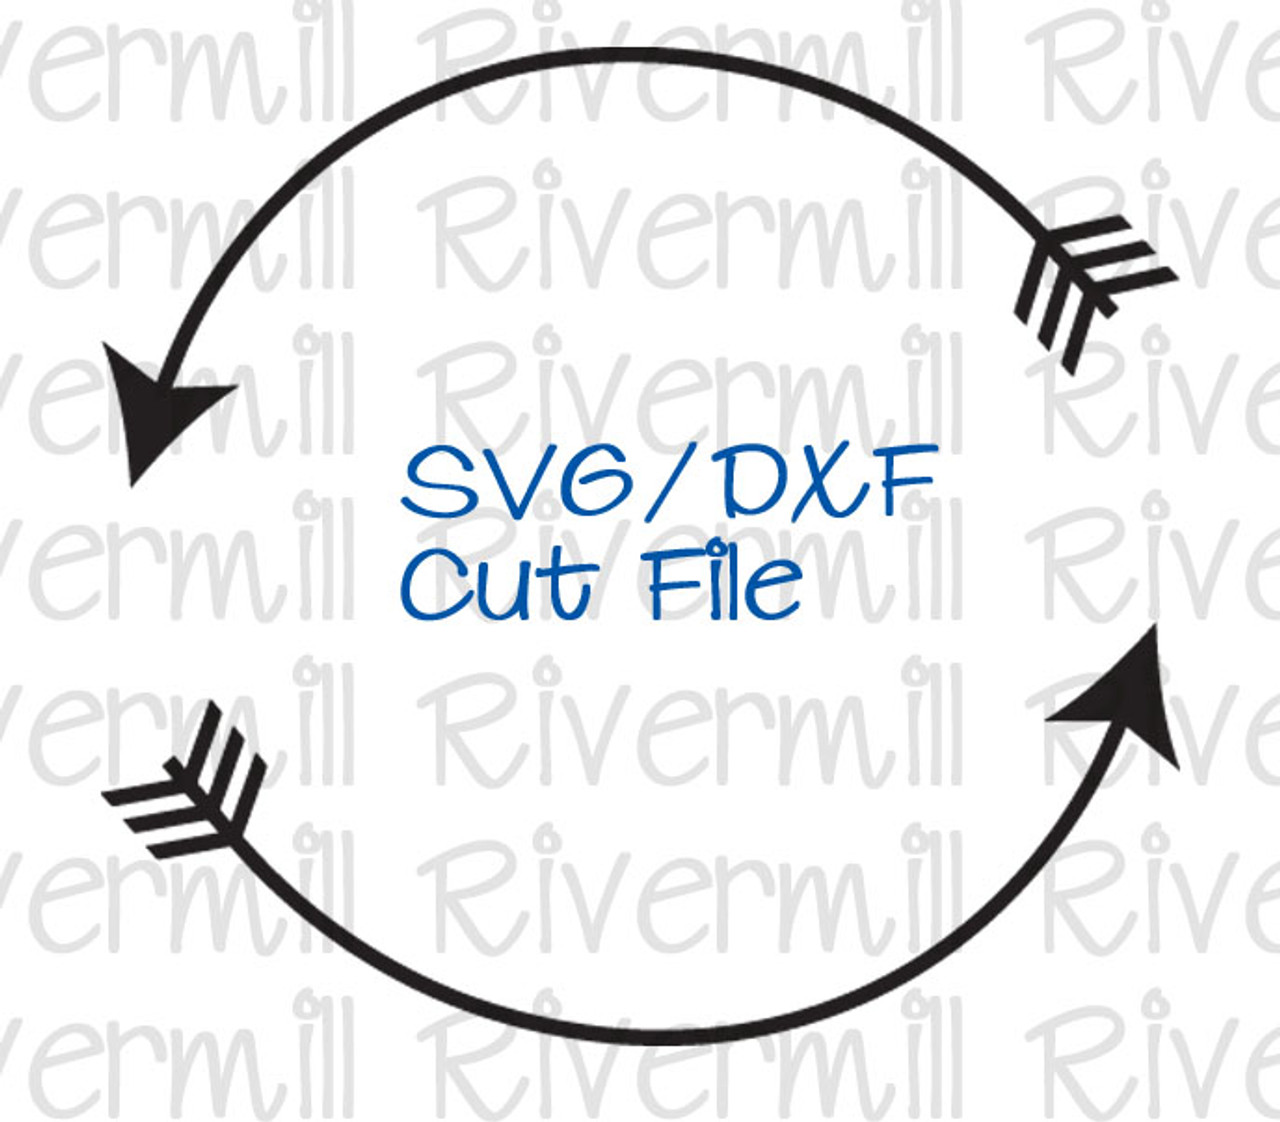 Download Svg Dxf Circle Arrow Monogram Frame Cut File Rivermill Embroidery